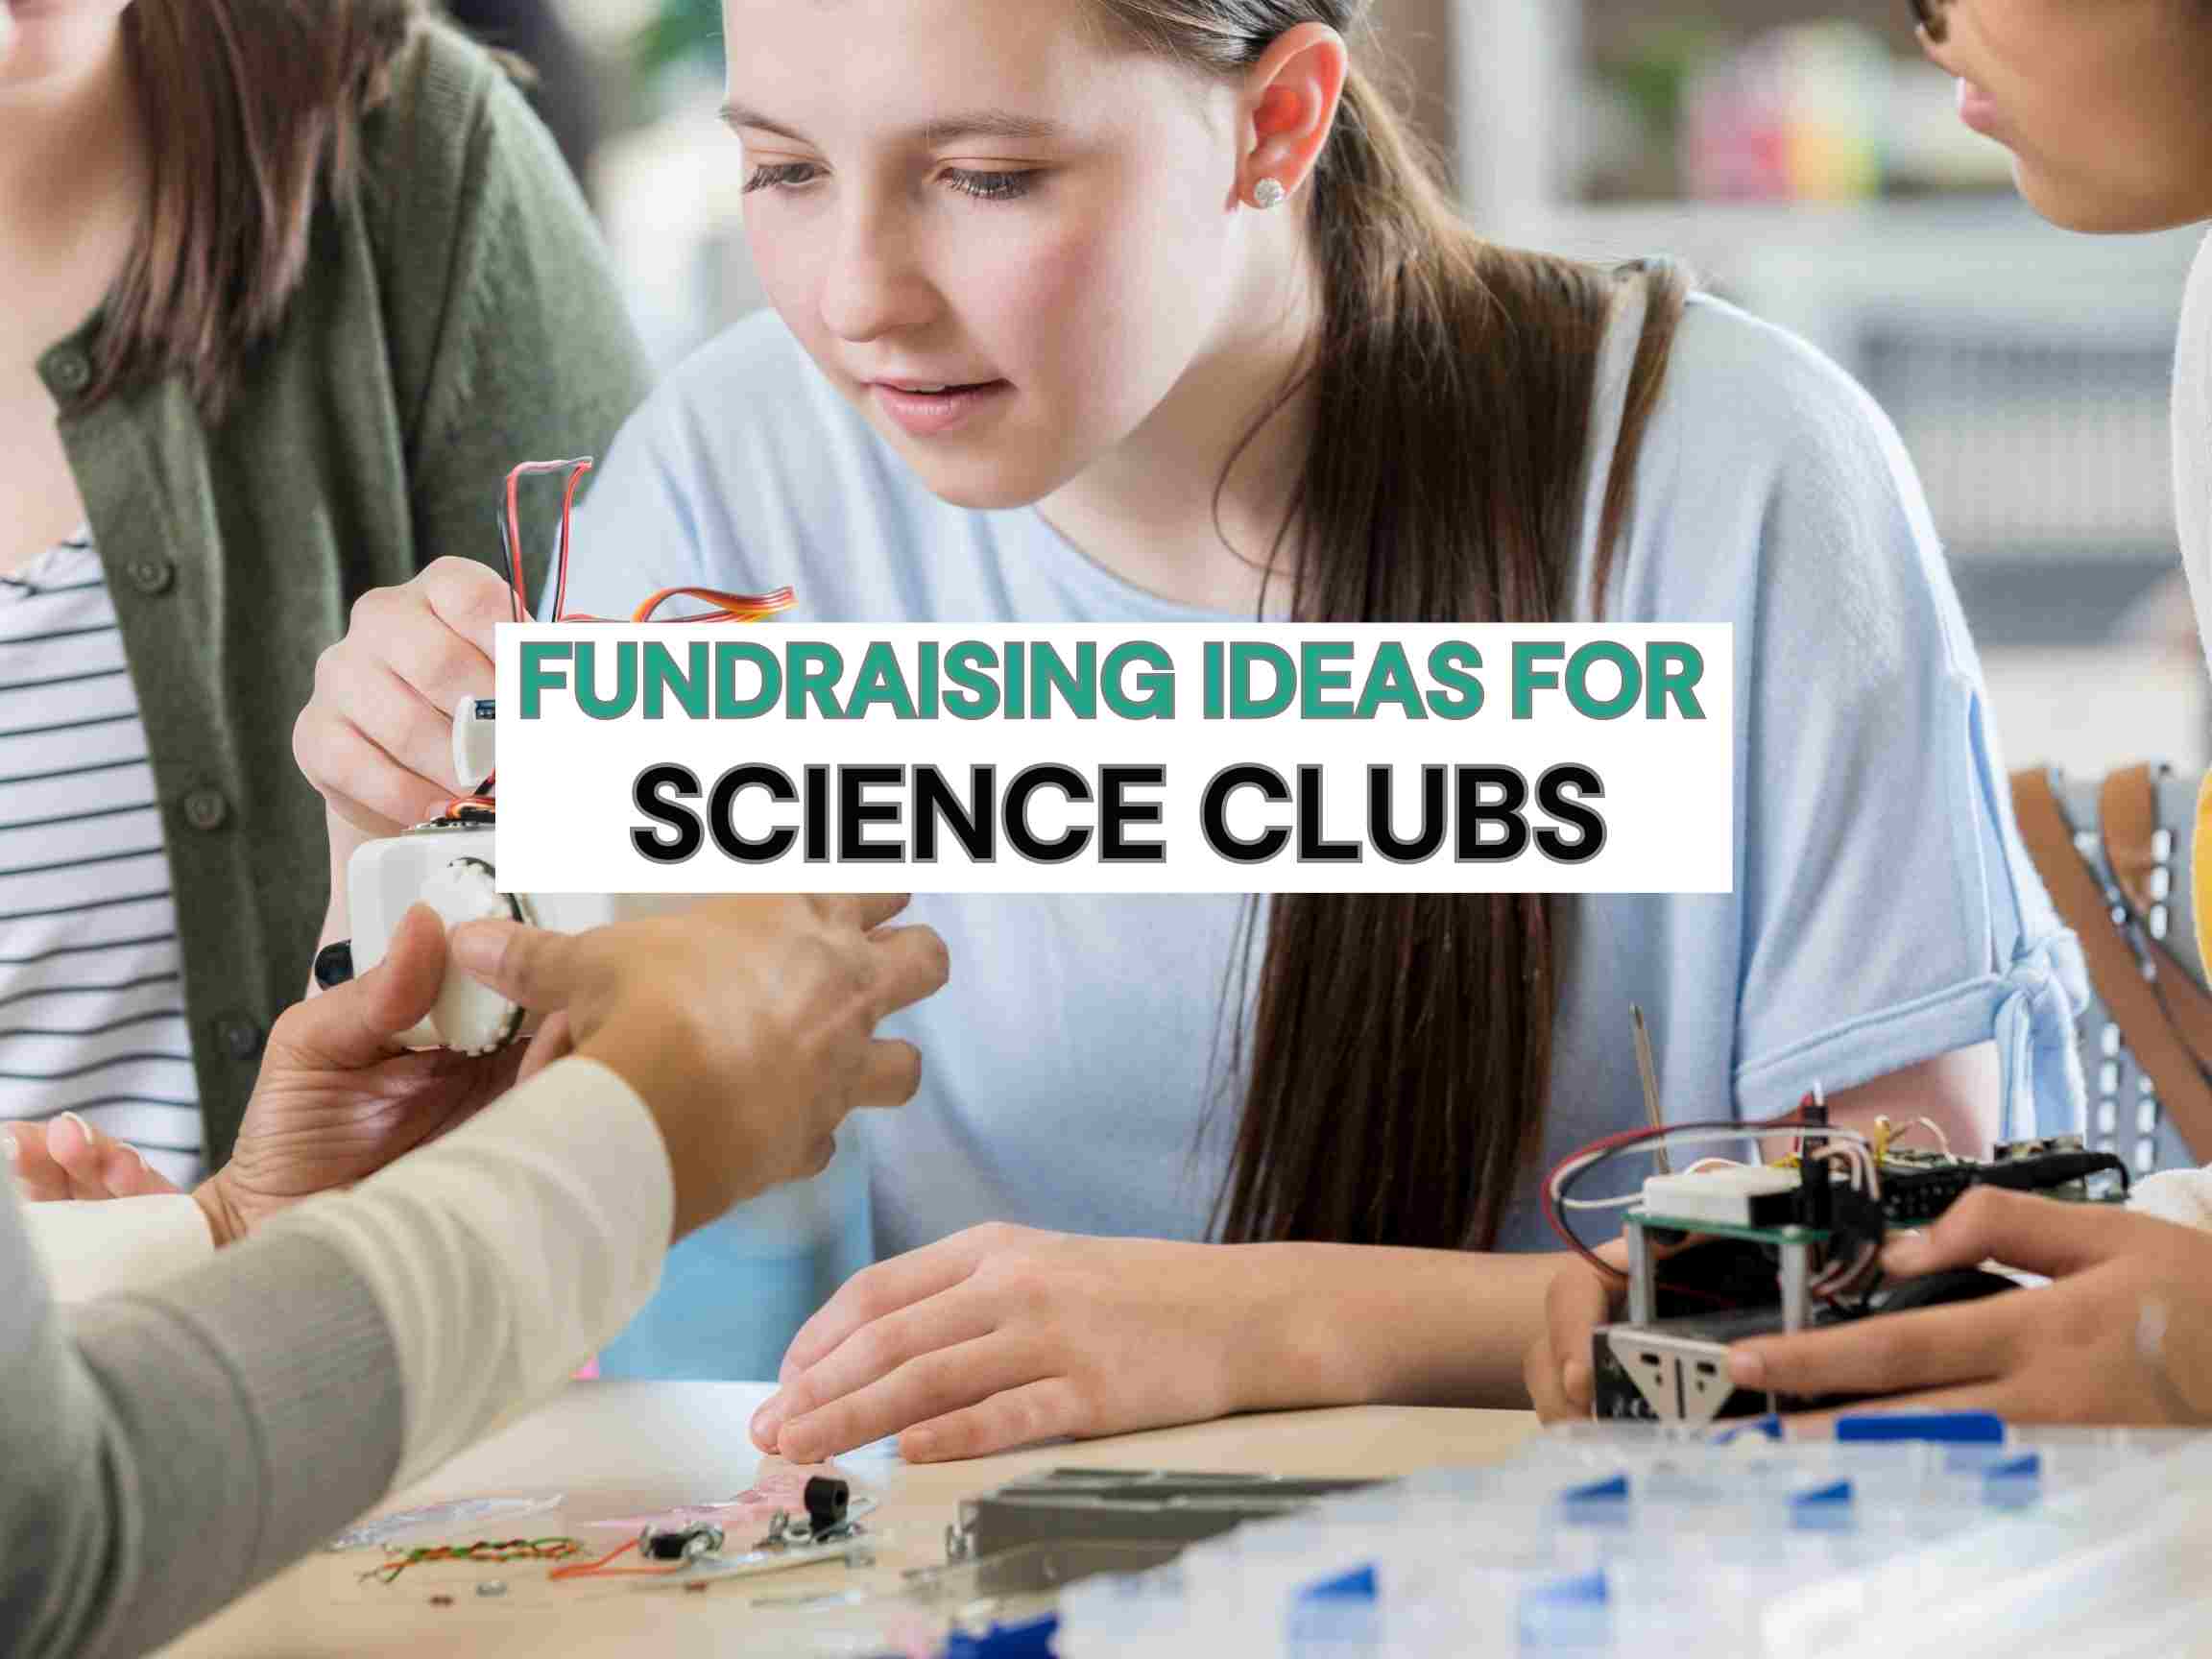 Fundraising ideas for science clubs